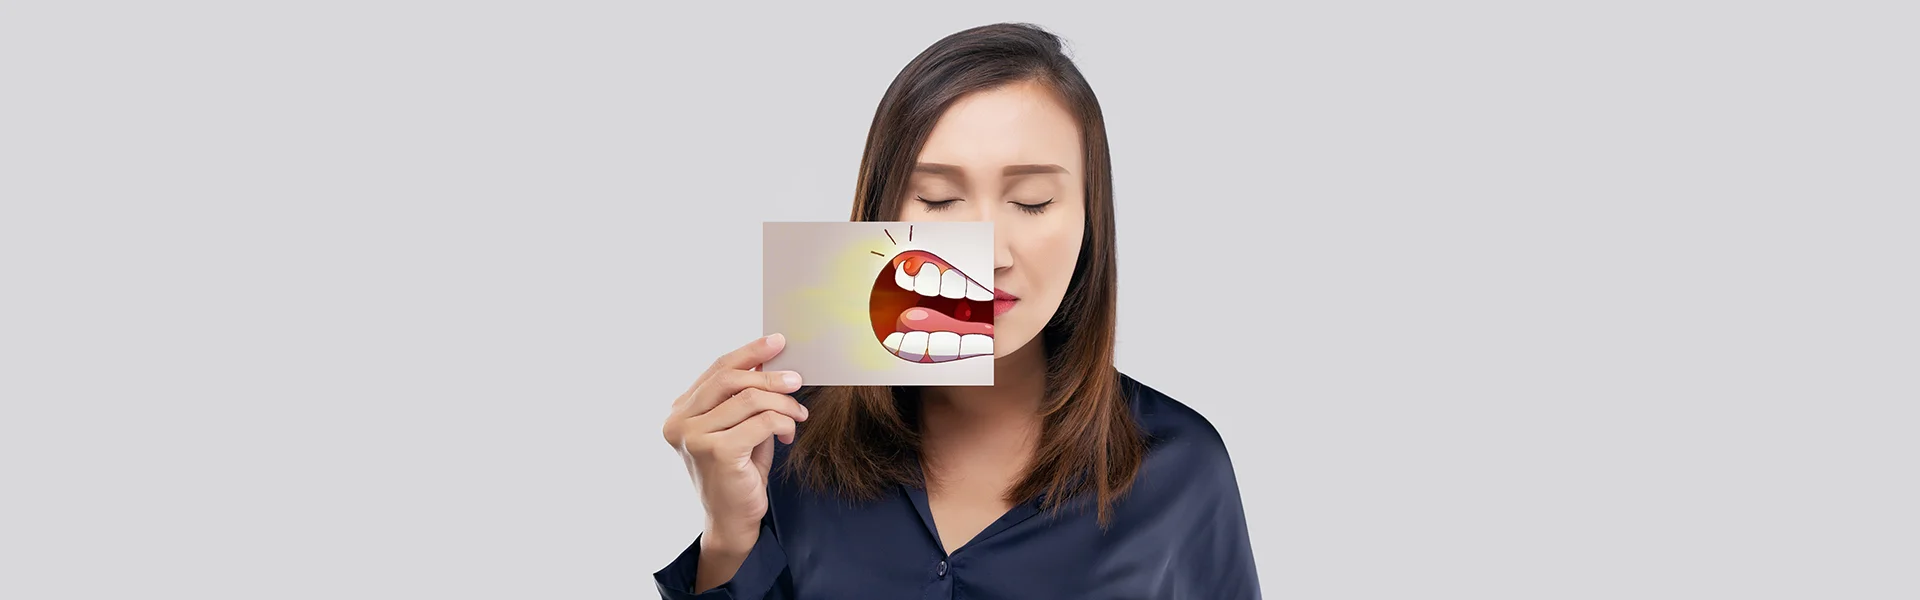 Gum Disease and Its Connection to Heart Disease